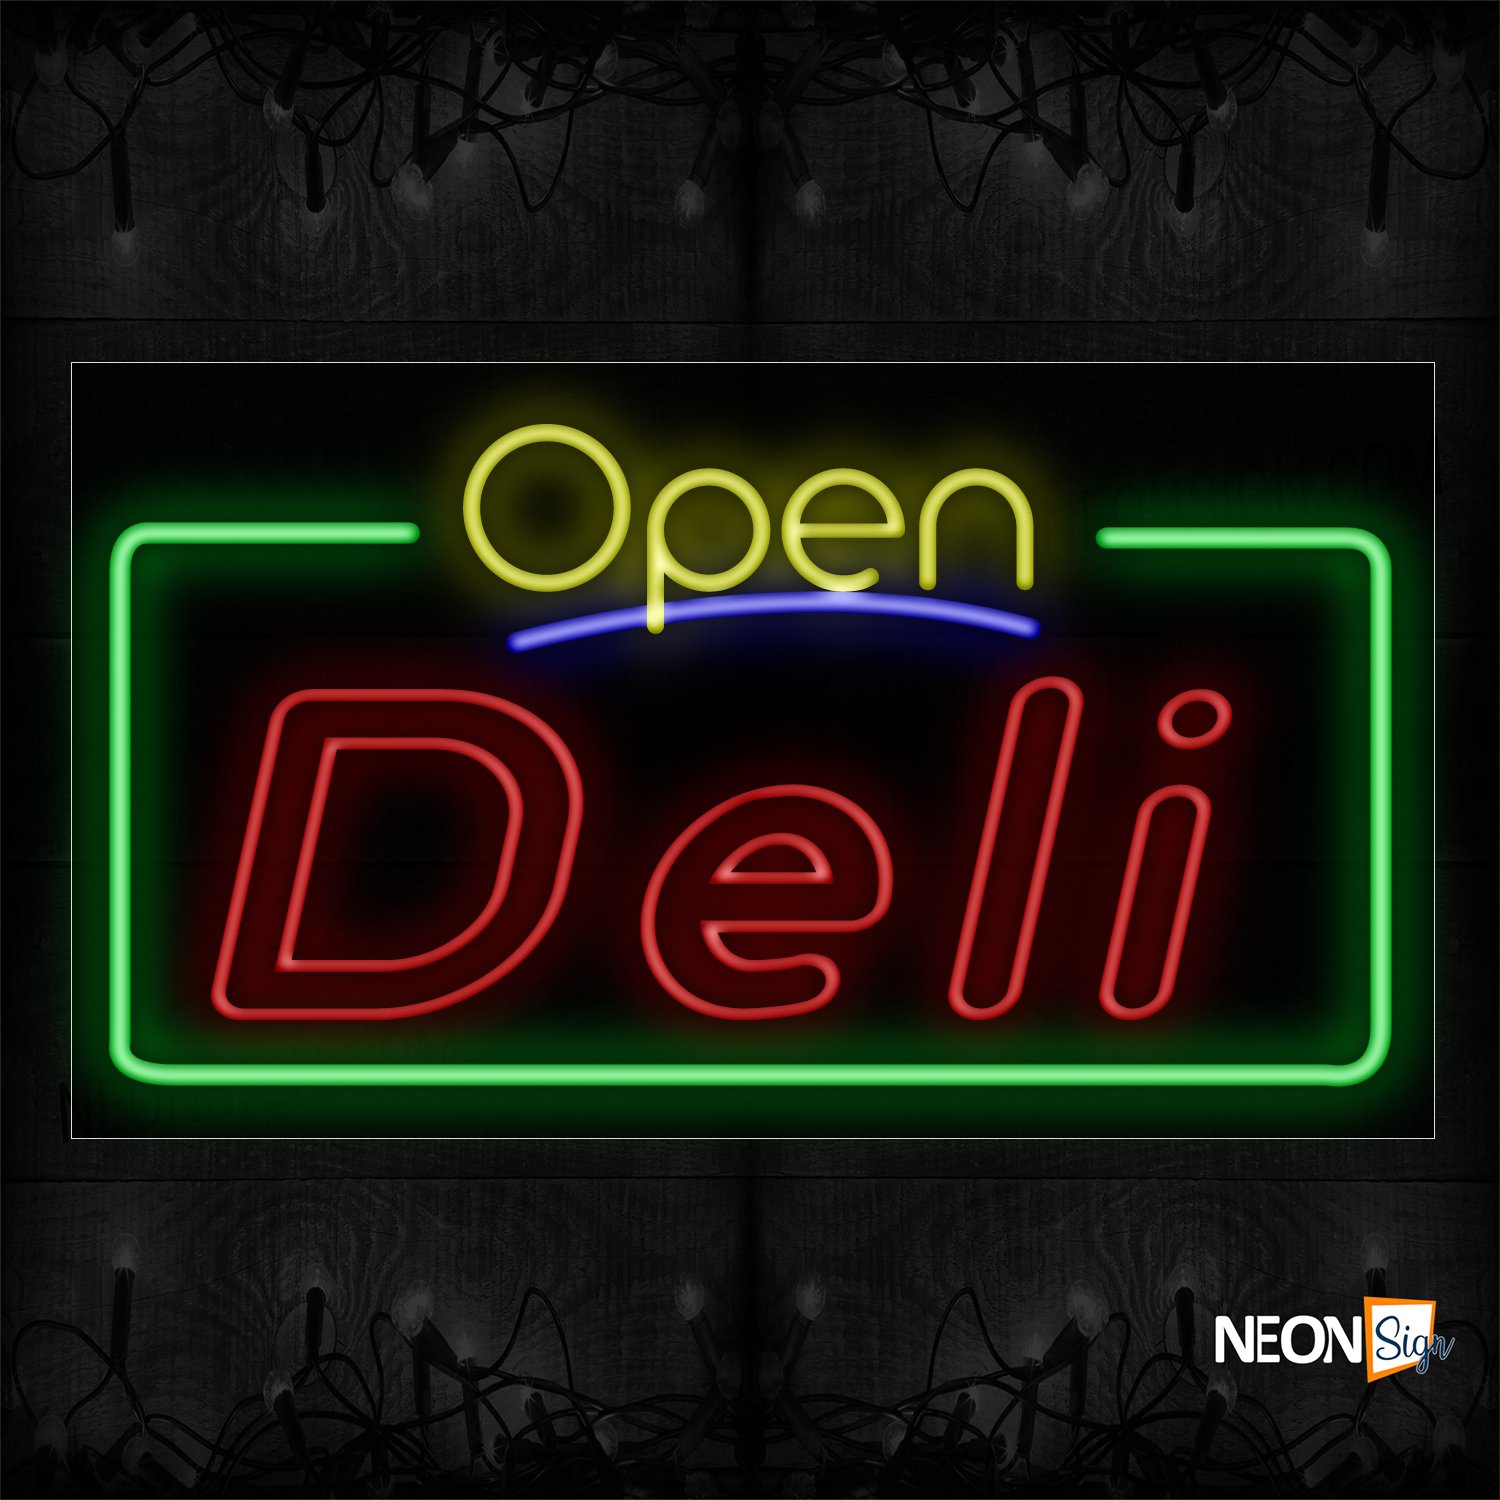 Image of 15492 Open Deli With Green Box And Outlined Text Traditional Neon_20x37 Black Backing